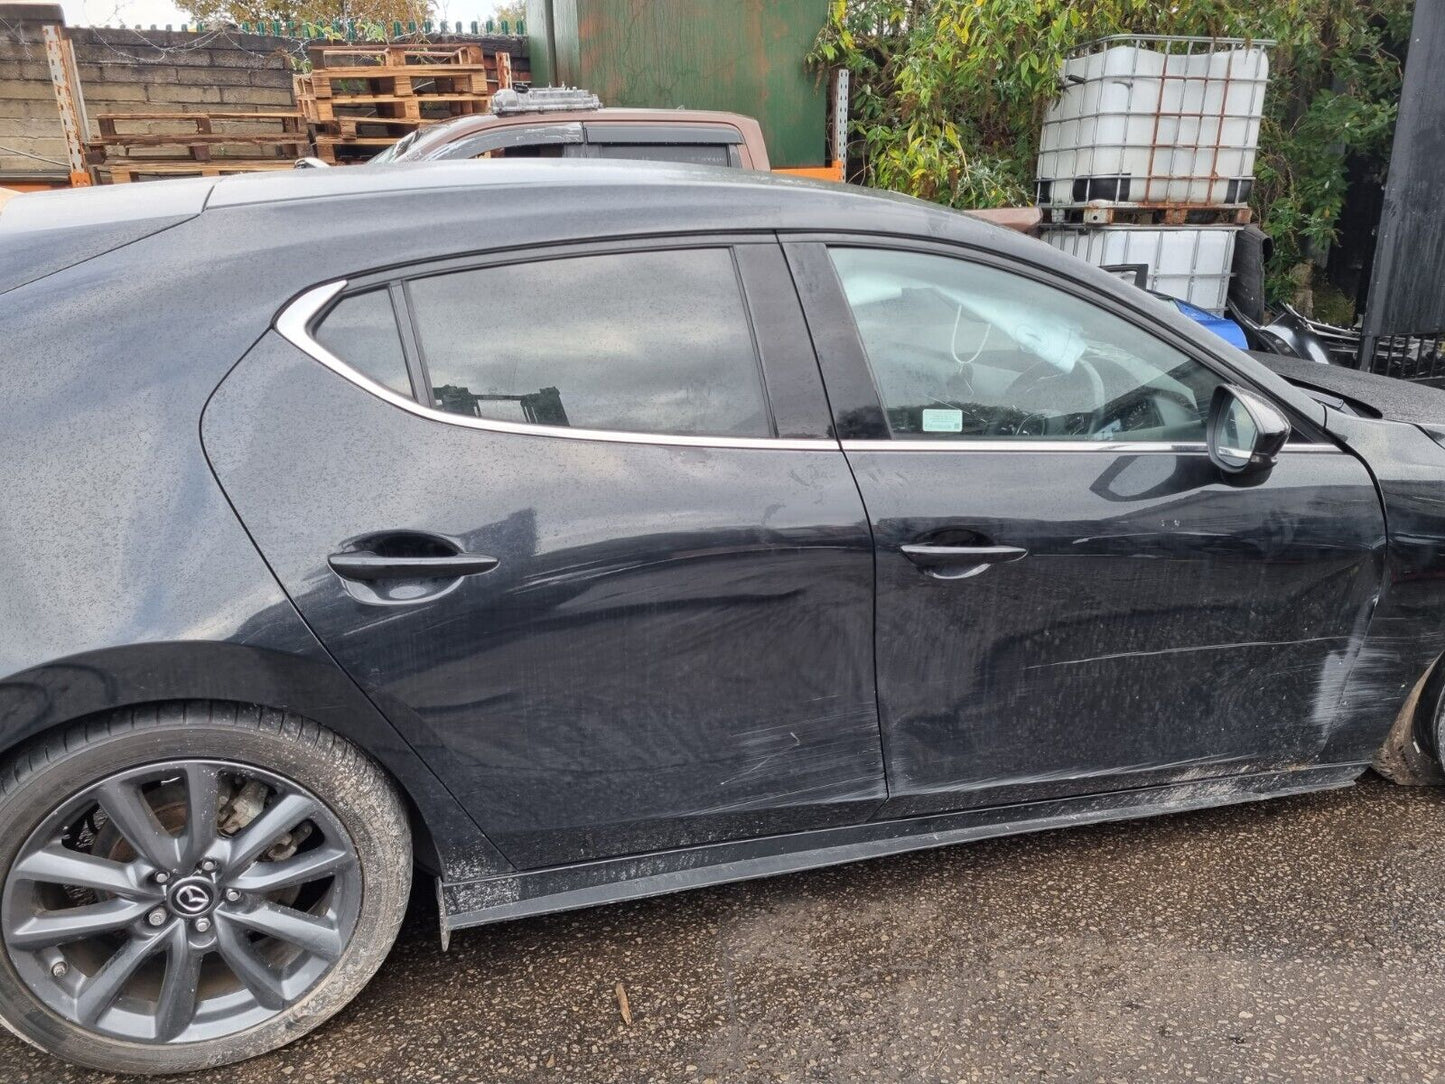 2020 MAZDA 3 GT SPORT BP MK4 2.0 PETROL MHEV 6 SPEED MANUAL FOR PARTS & SPARES